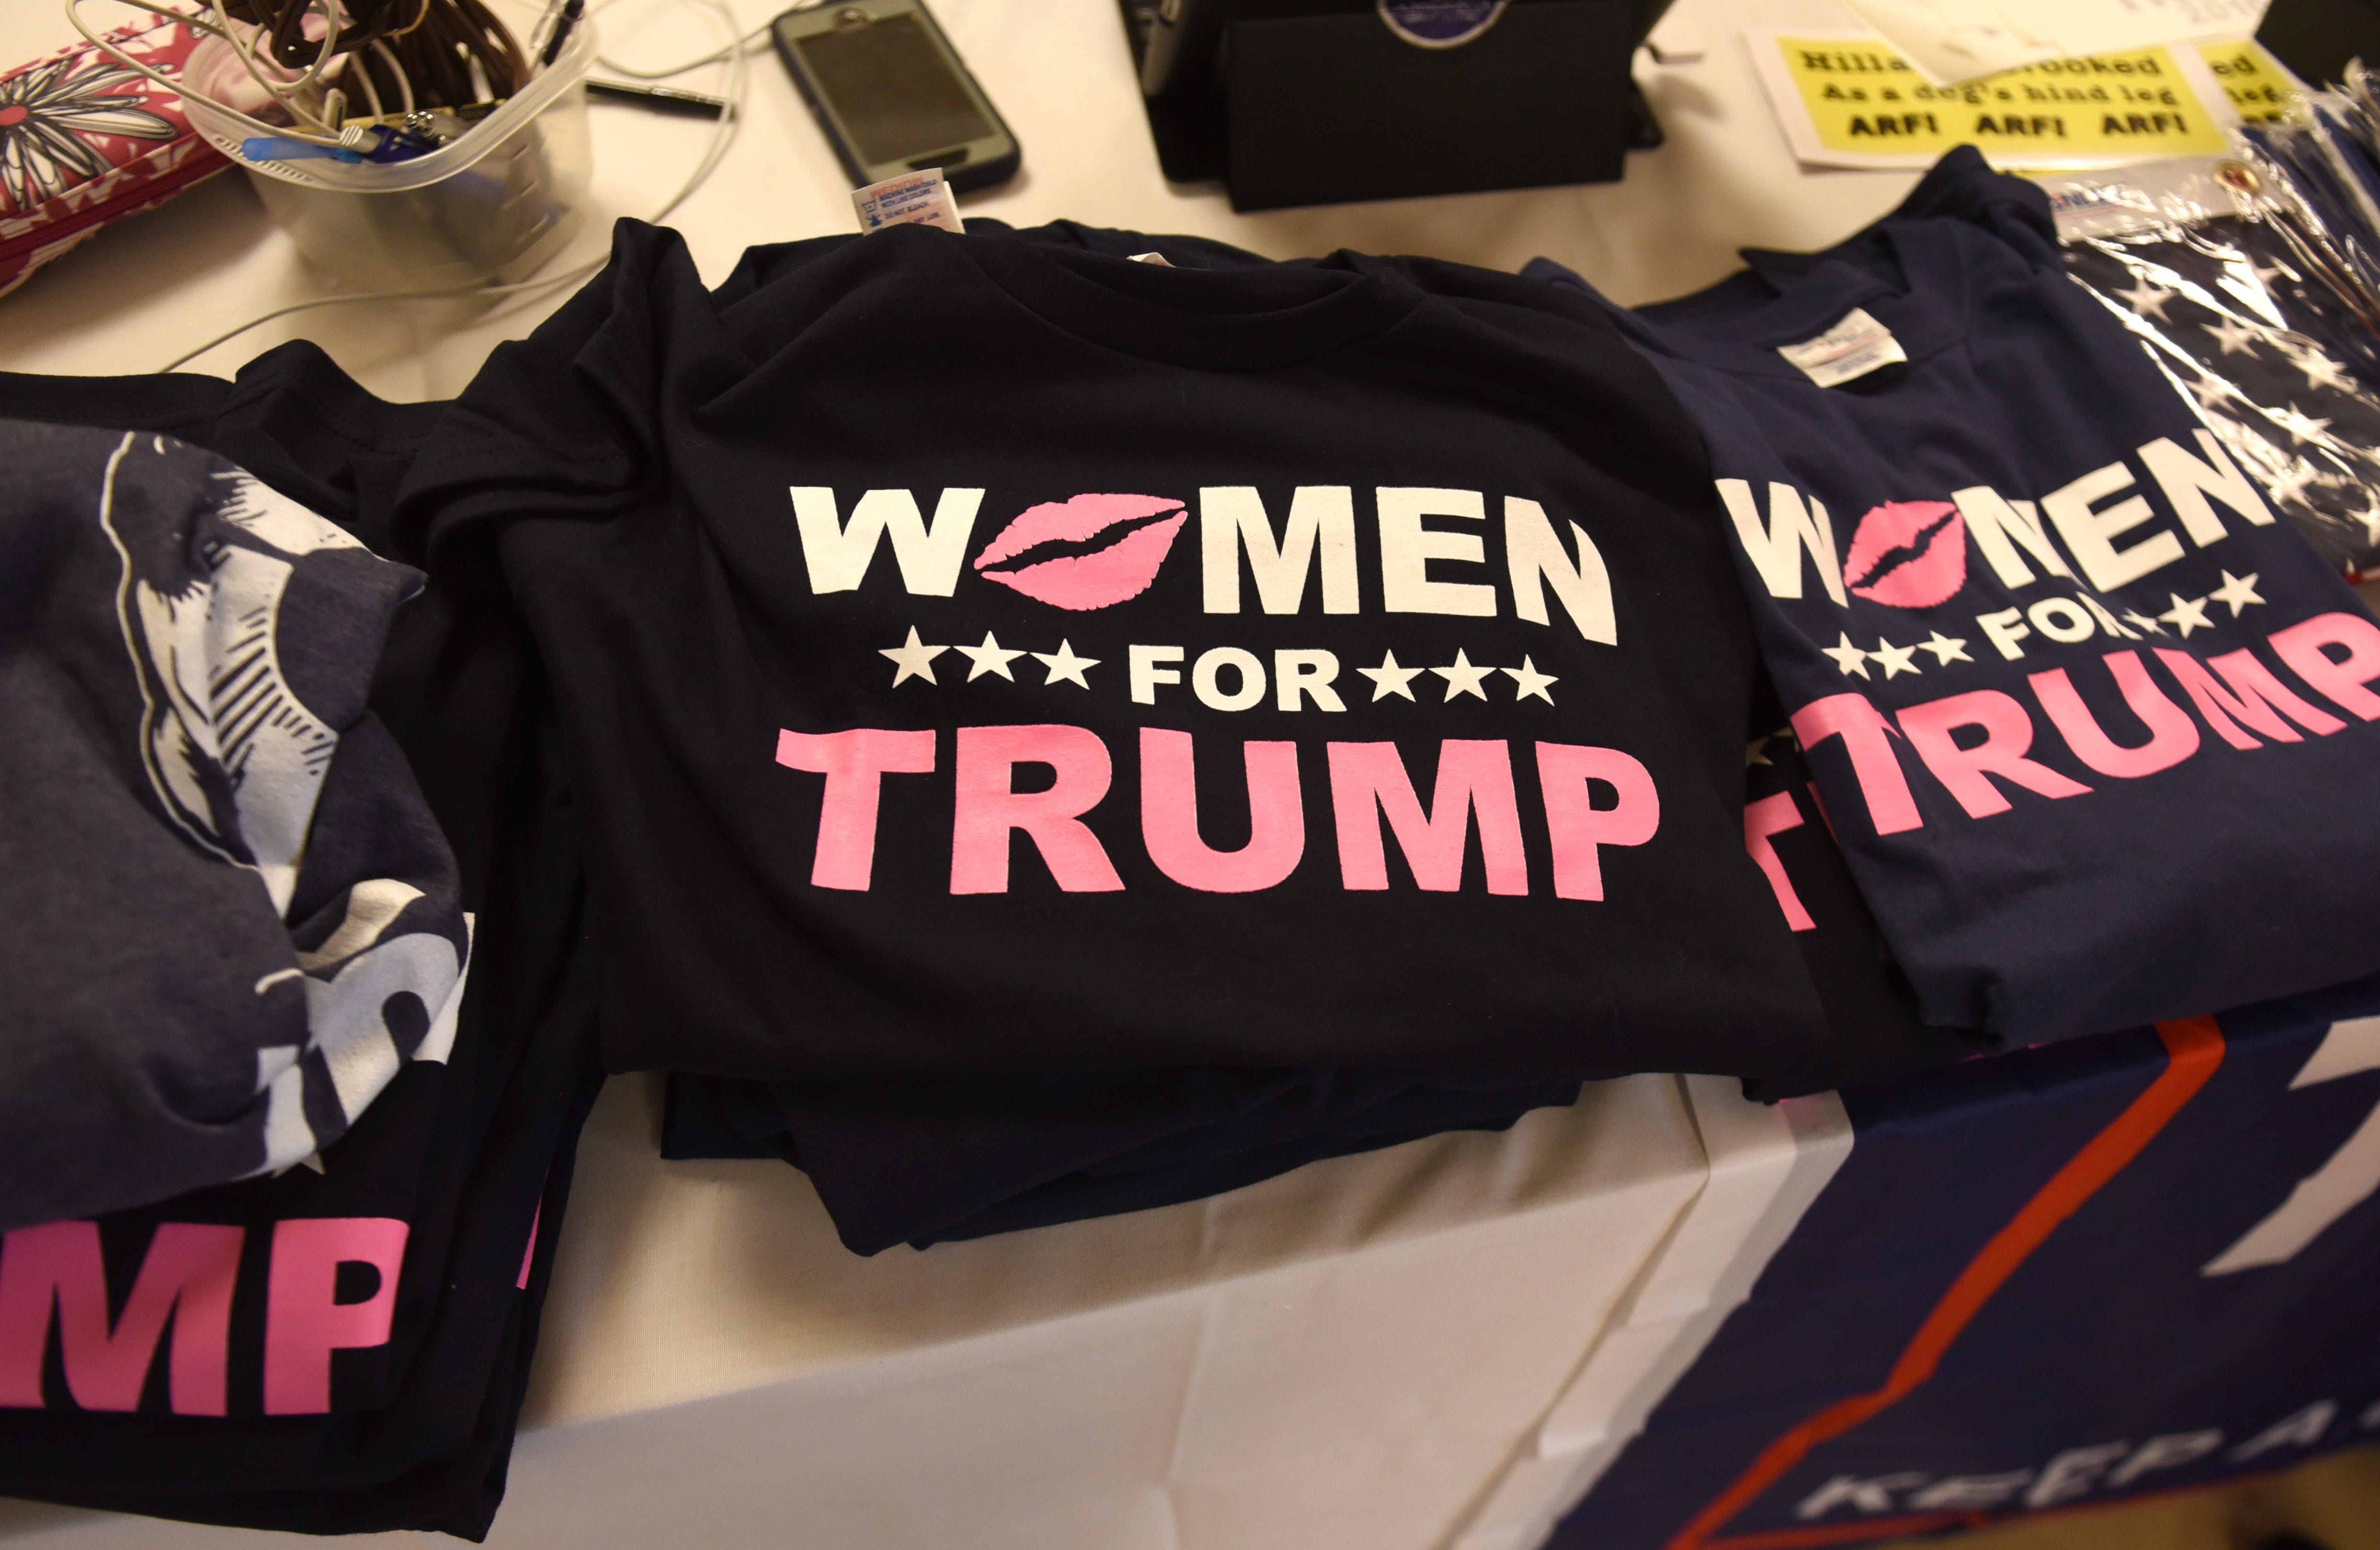 Women for Trump T-shirts are among the merchandise for sale at the Trumperware luncheon.